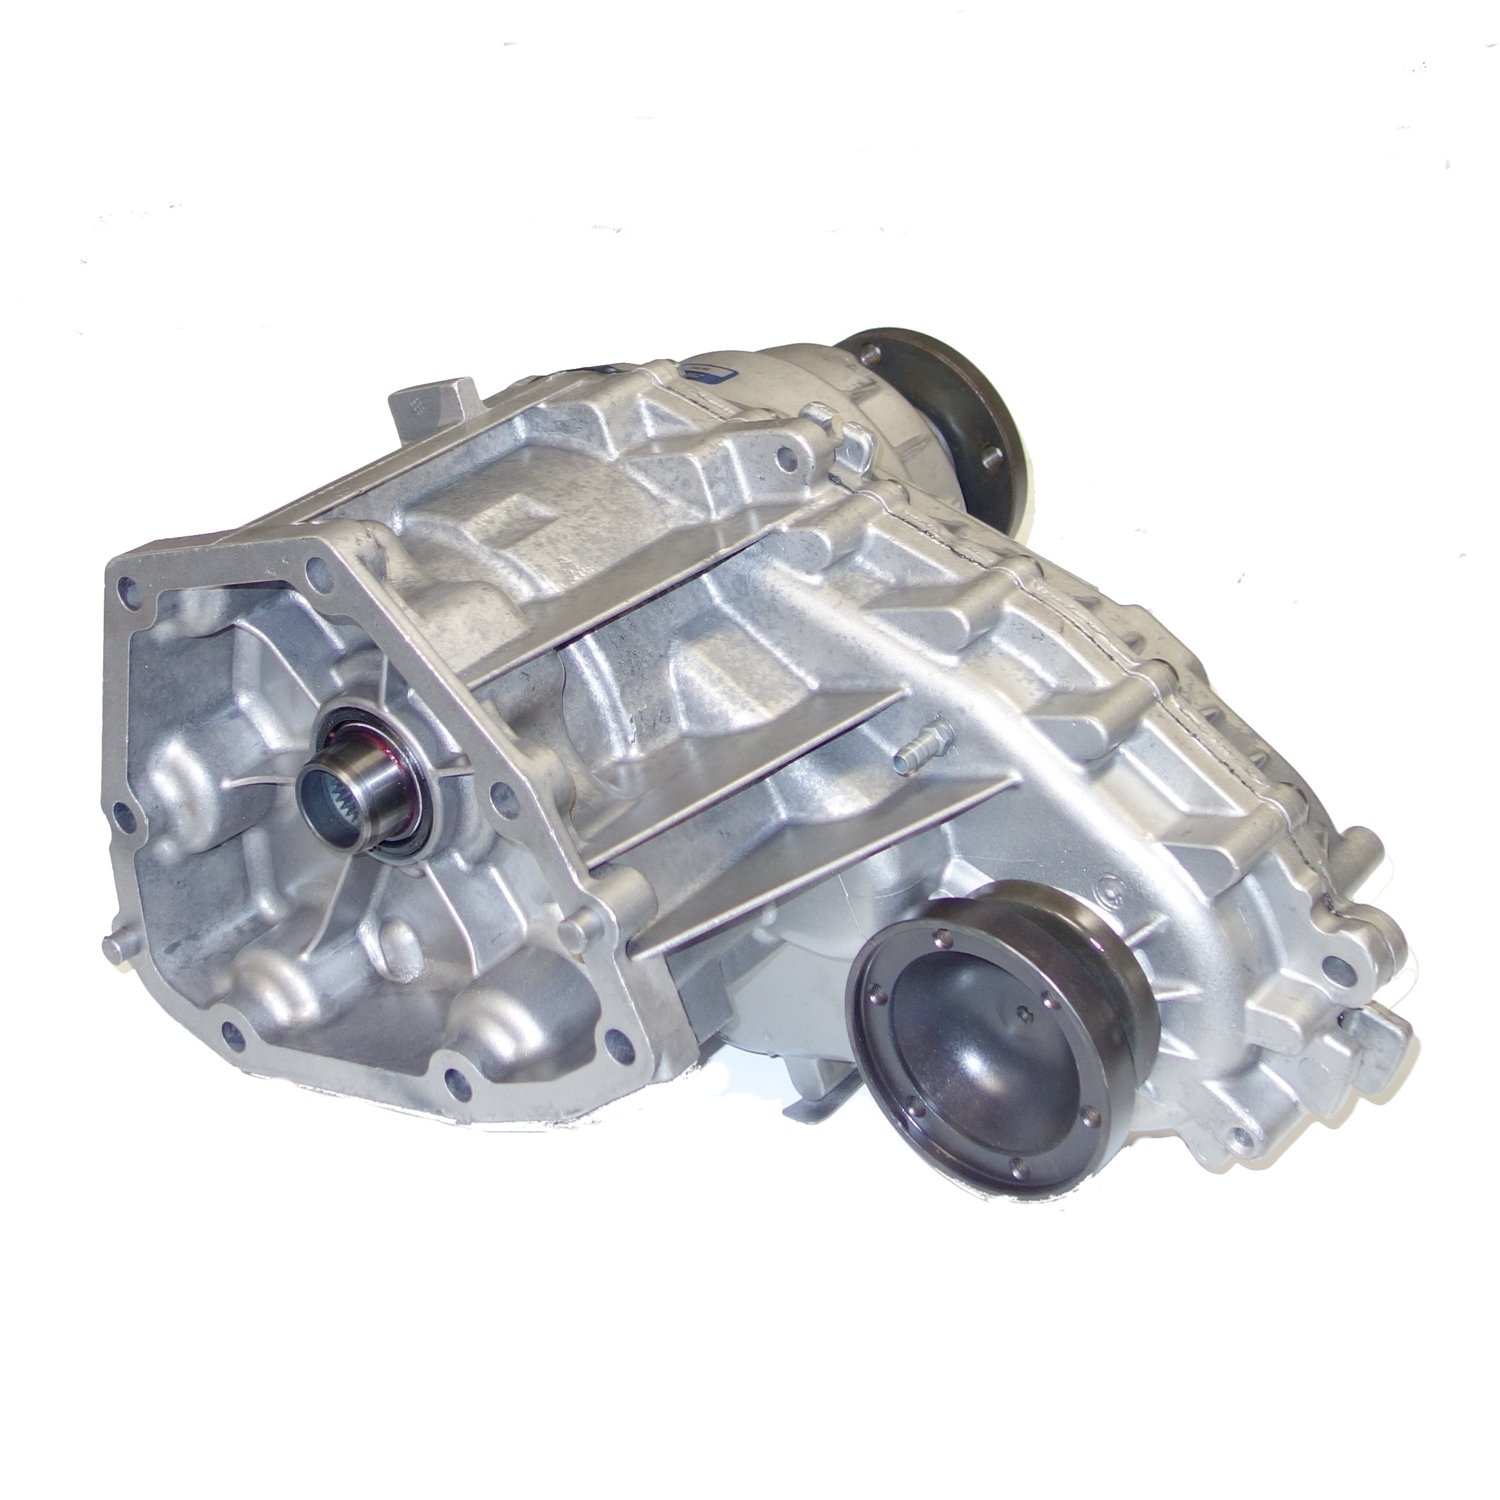 Remanufactured BW4412 Transfer Case for Ford 06-10 Explorer & Mountaineer 4.0L, w/o Shift Motor